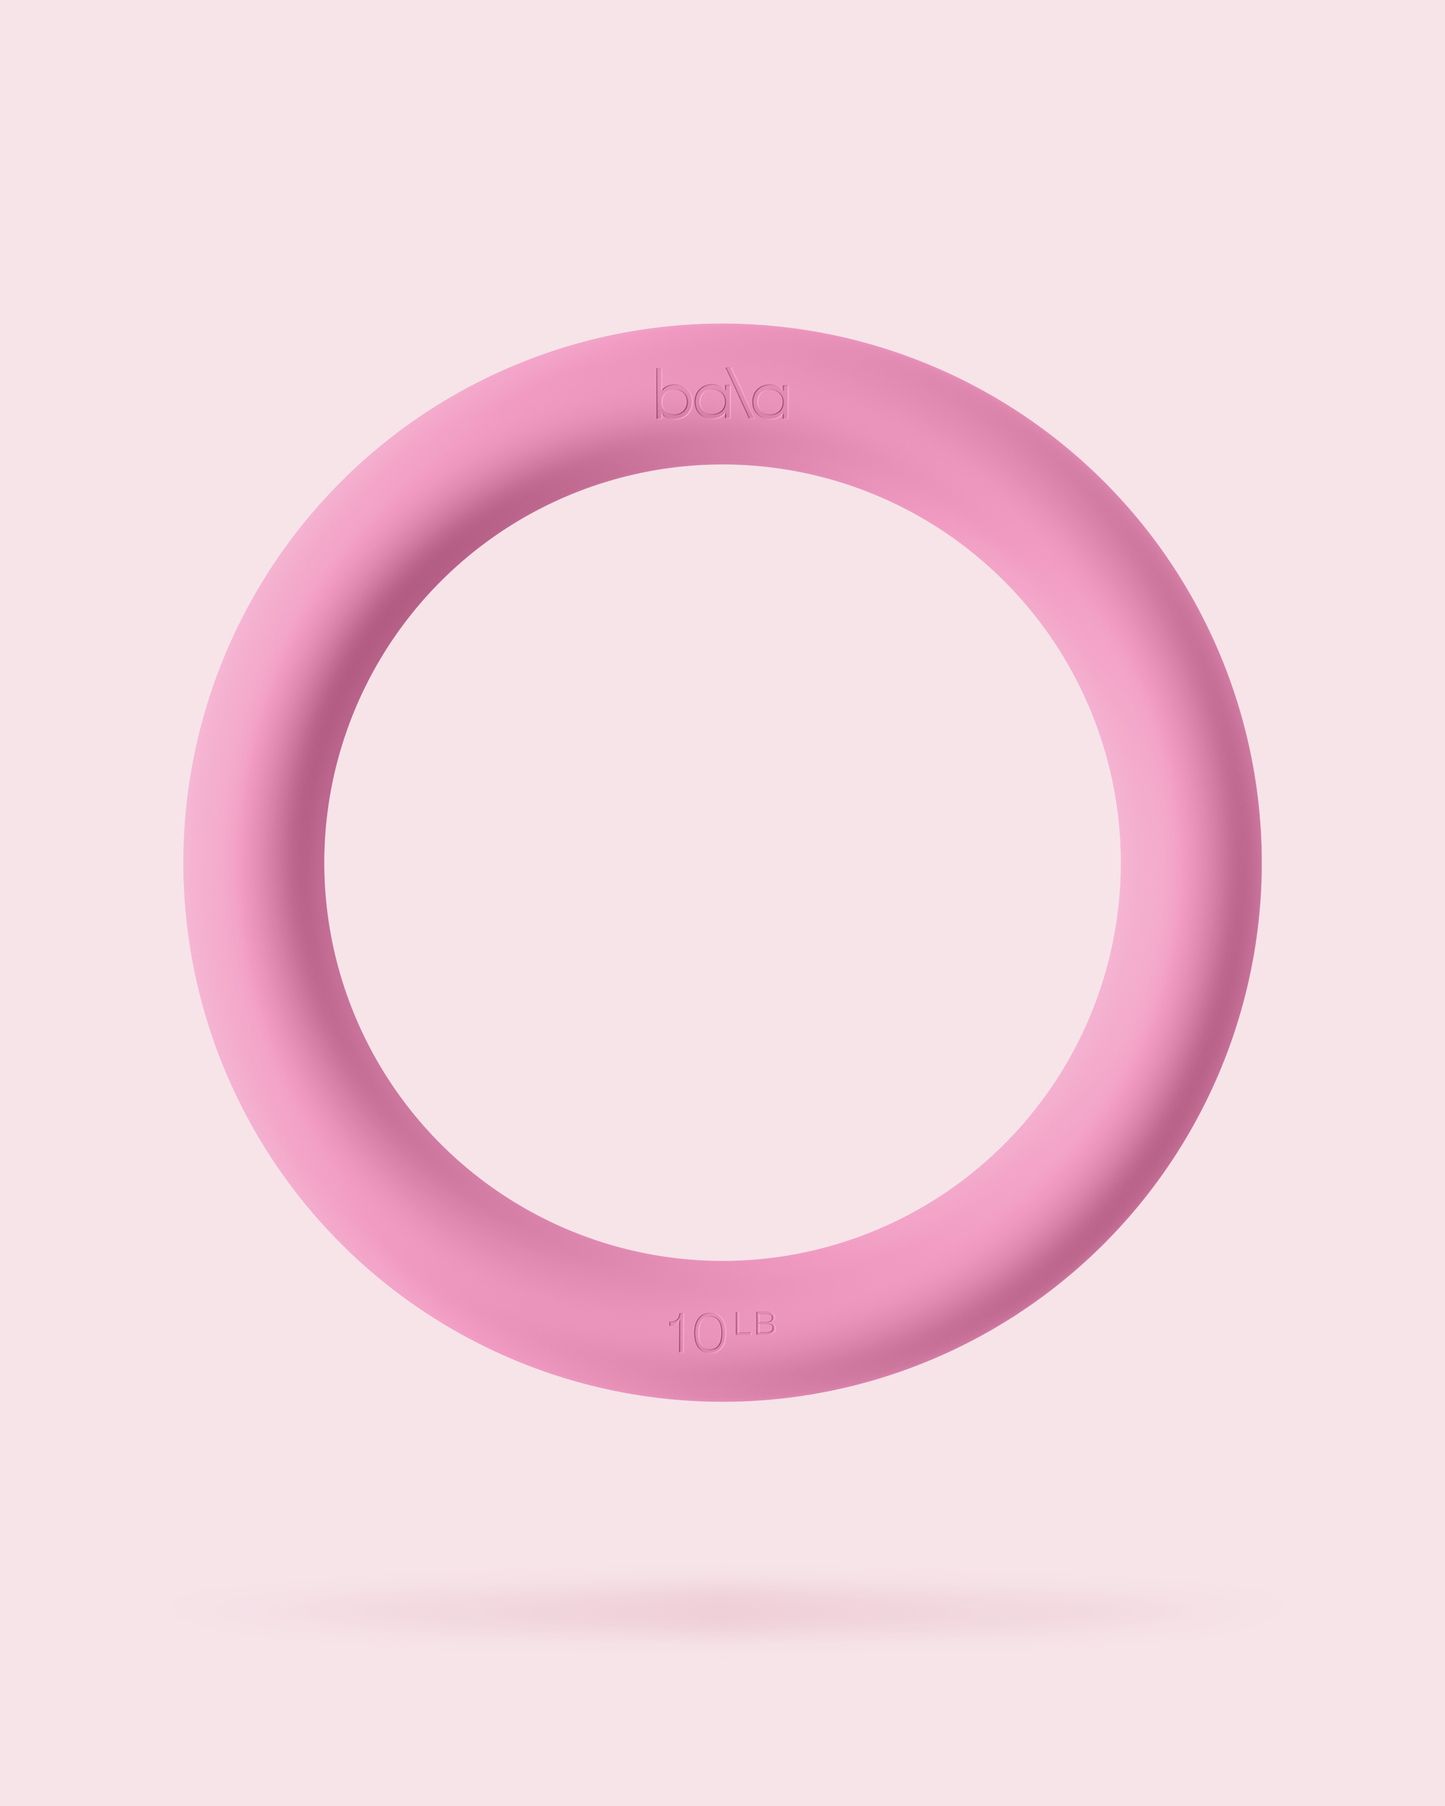 The Pink Power Ring